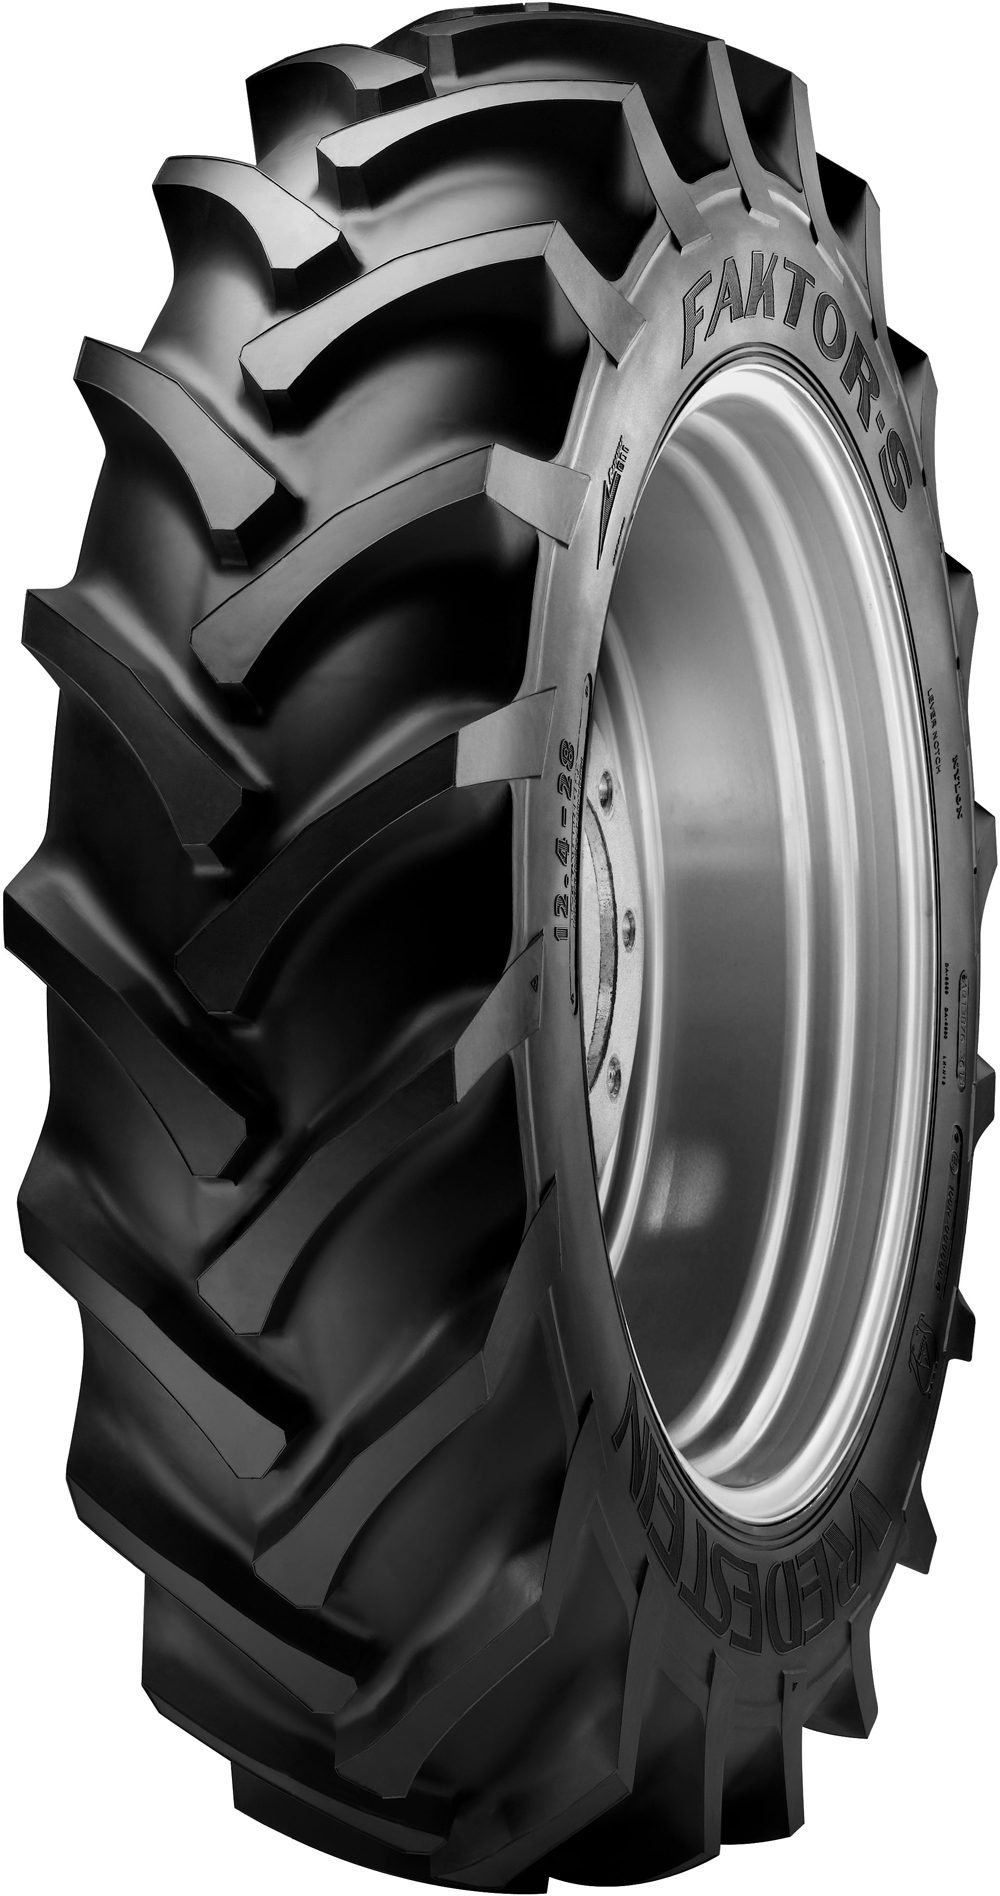 product_type-industrial_tires VREDESTEIN Faktor-S 8 TT 13.6 R28 125A8